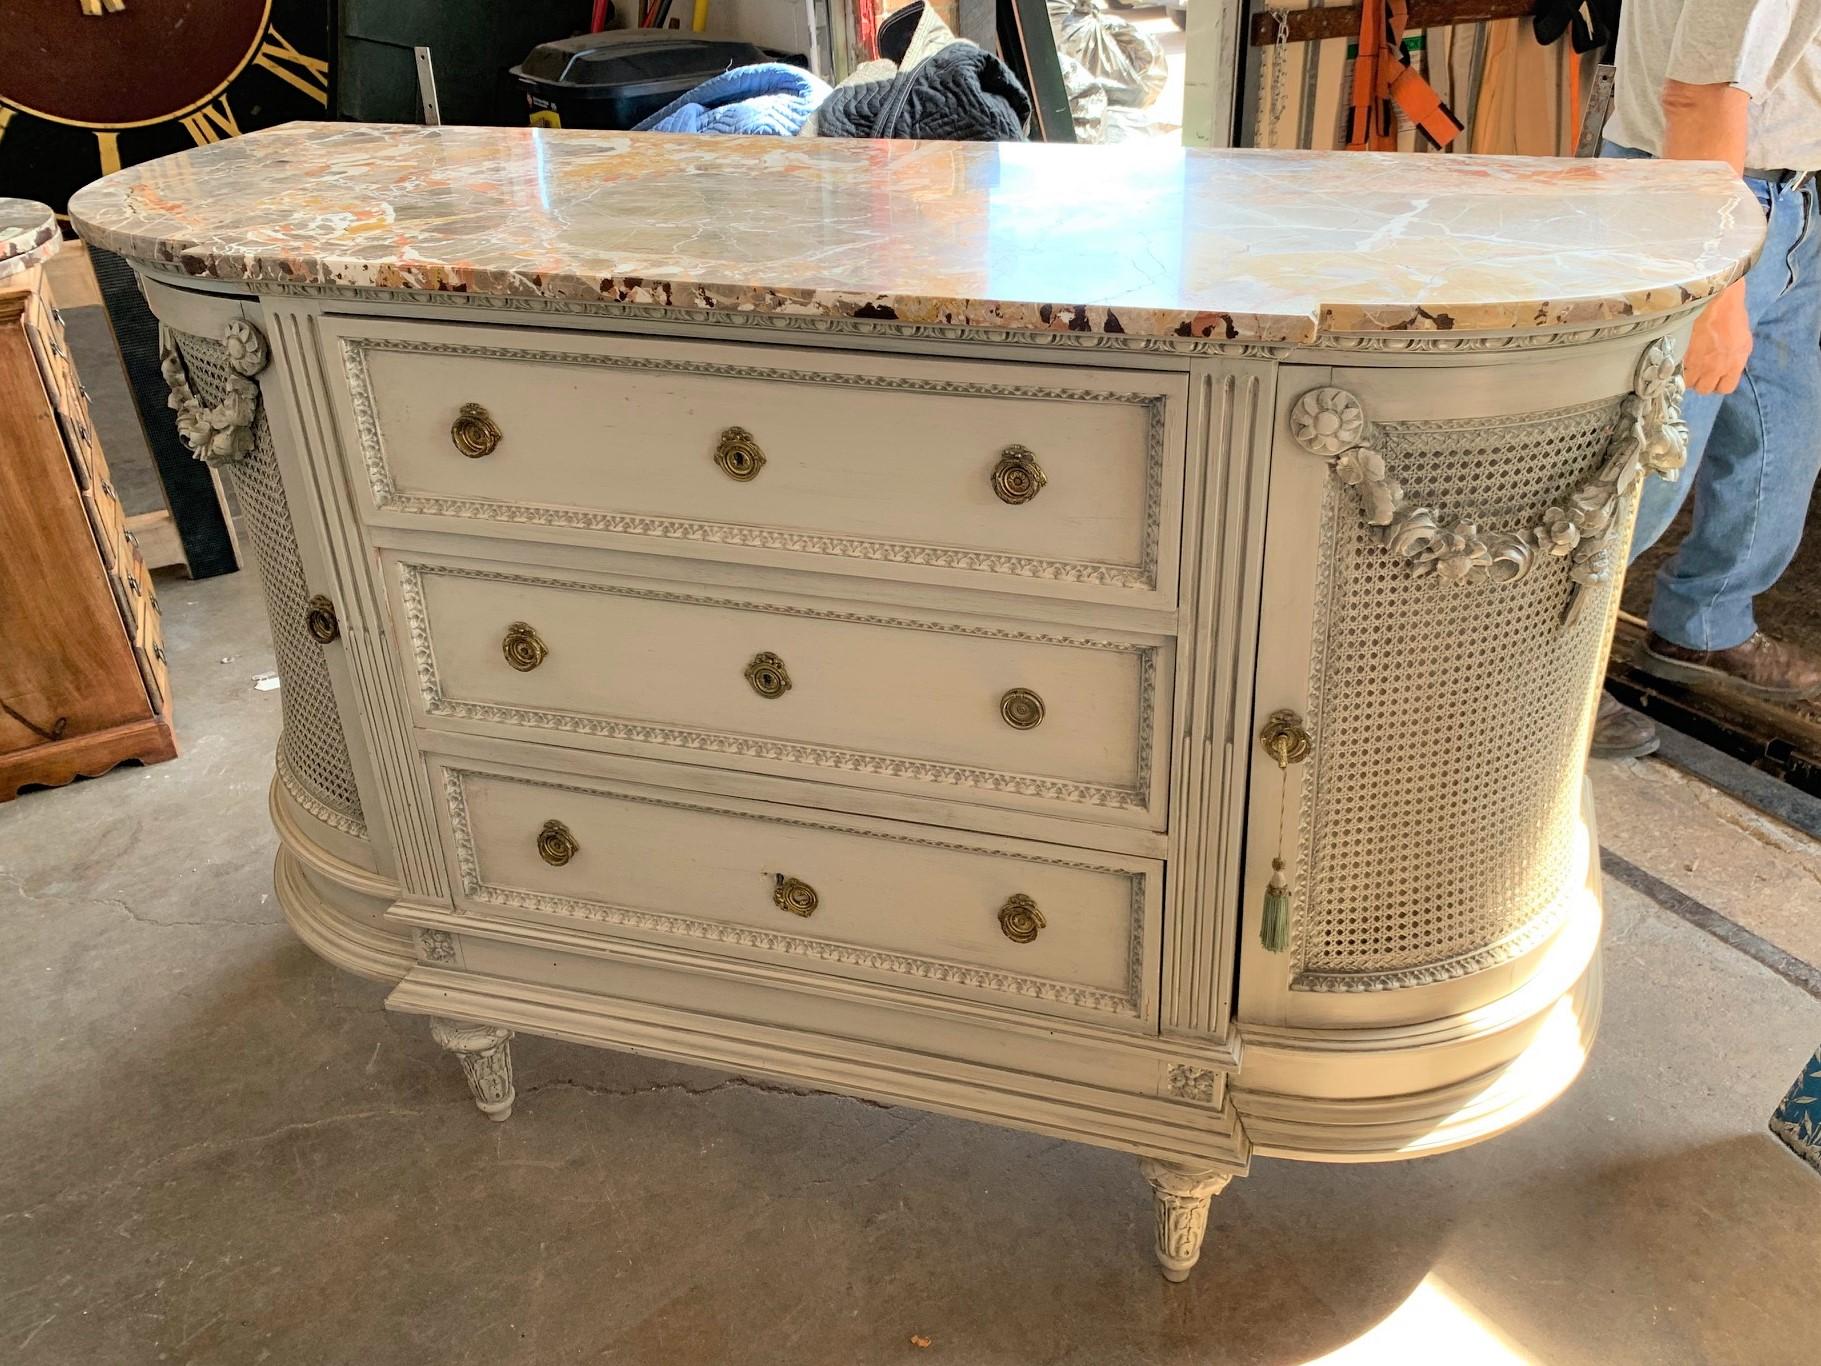 Lovely 19th century French Louis XVI style sideboard or buffet with a painted finish and a remarkable breccia marble top. The curved cupboards with caned panels and carved festoon swags. Fitted with three drawers with bead trim, and raised on short